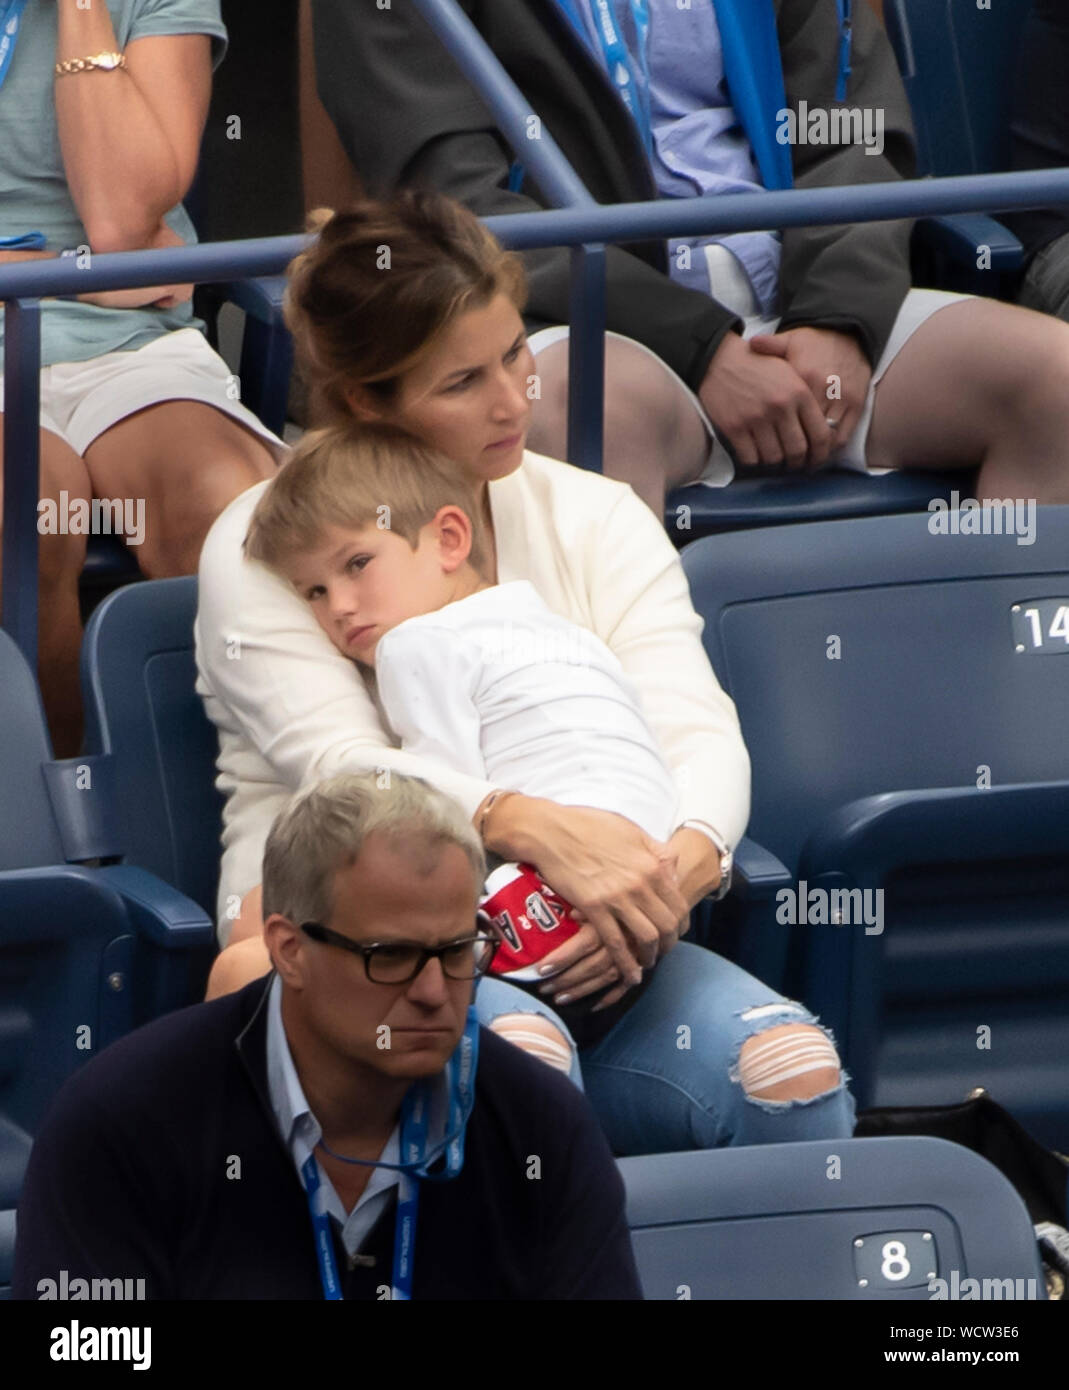 August 28, 2019: Mirka Federer holds her son during Roger Federer's match  at the US Open being played at Billie Jean King National Tennis Center in  Flushing, Queens, NY. © Jo Becktold